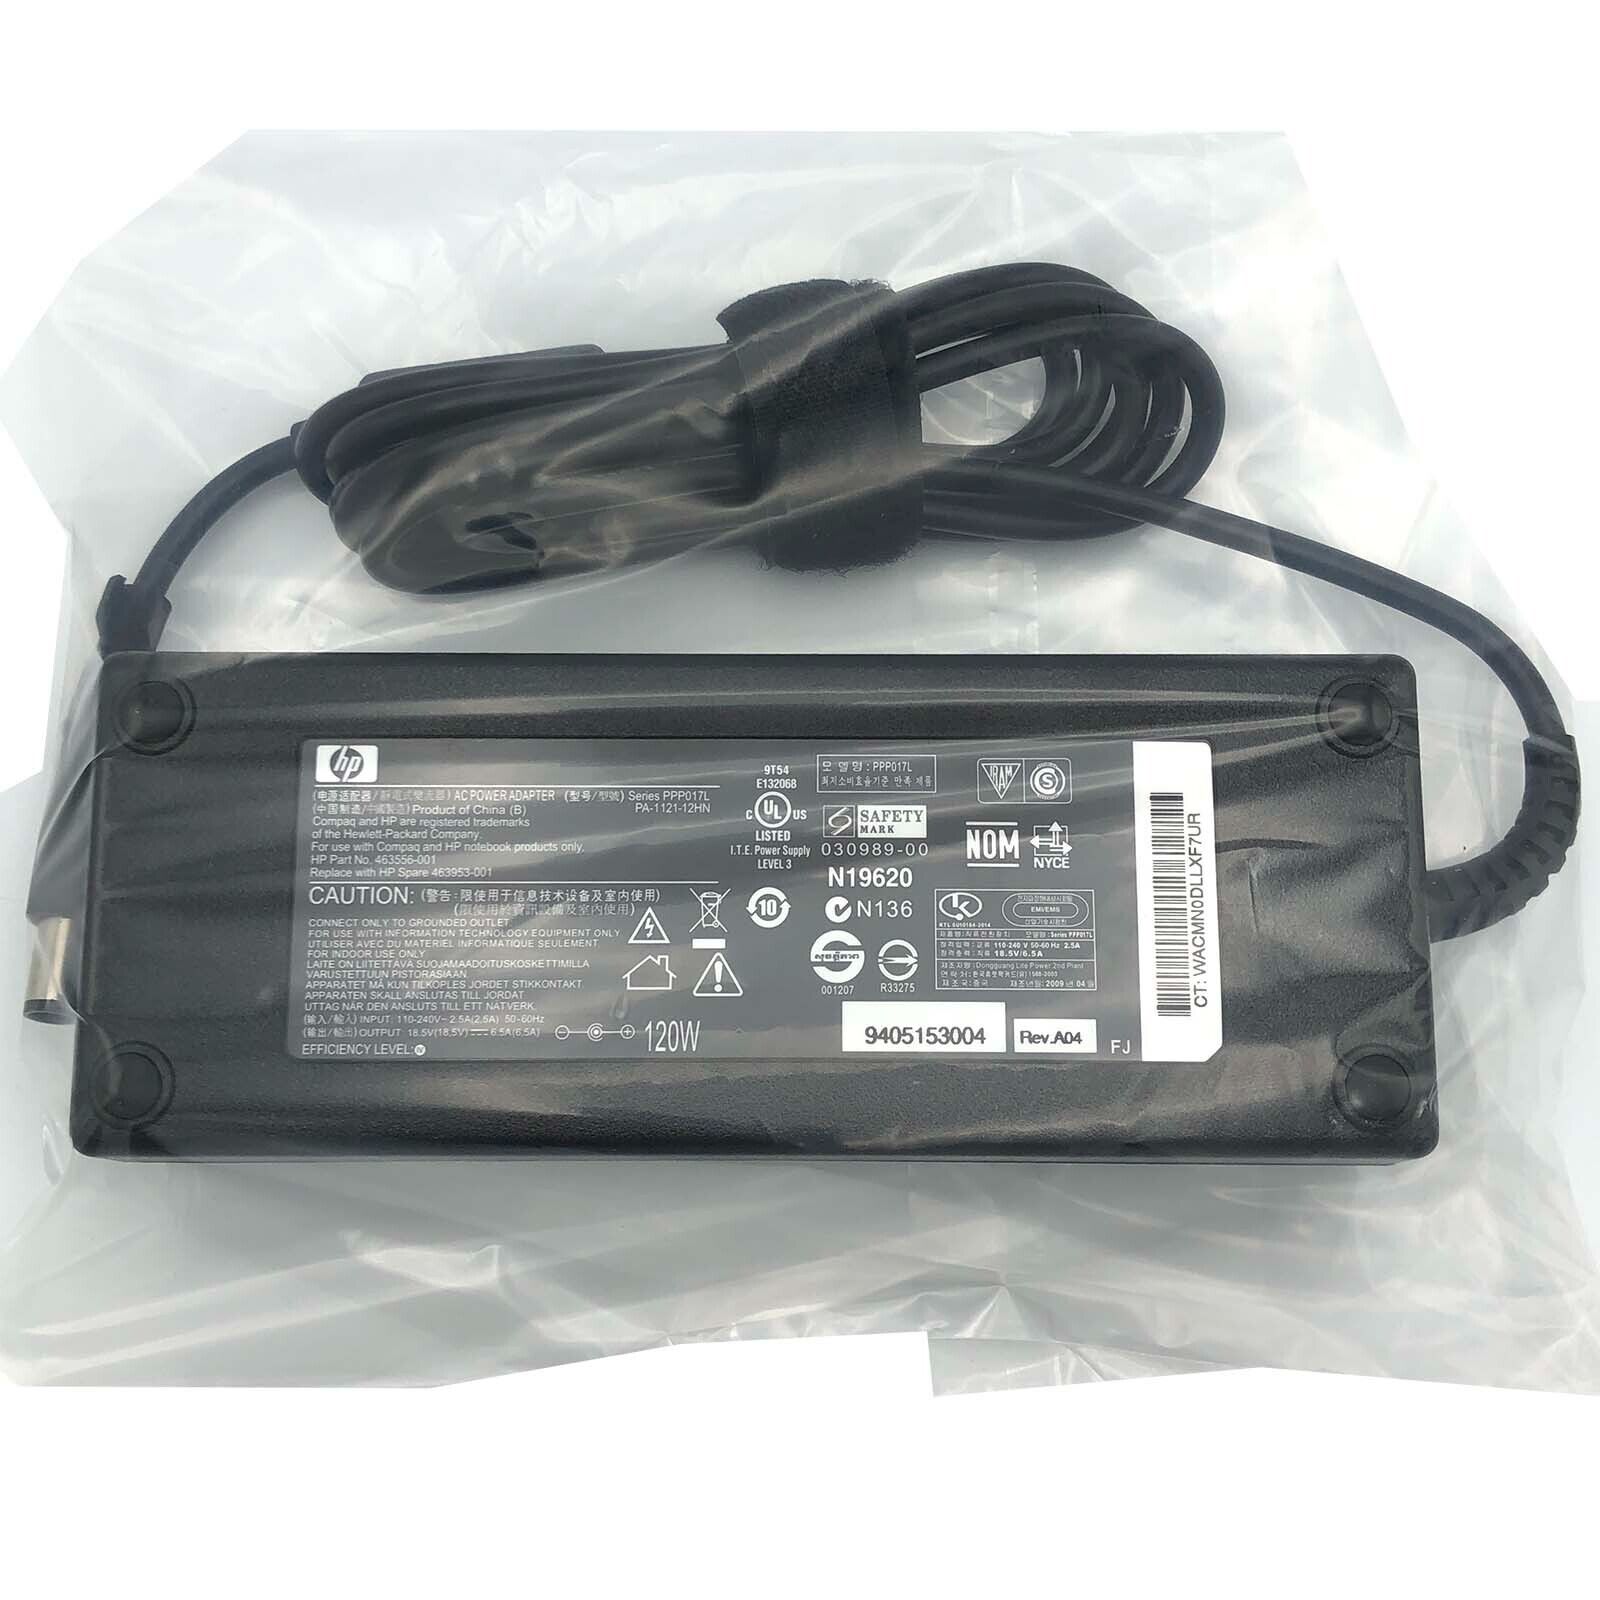 NEW Original 120W HP AC DC Adapter for Docking Station HSTNN-IX01 Power Charger